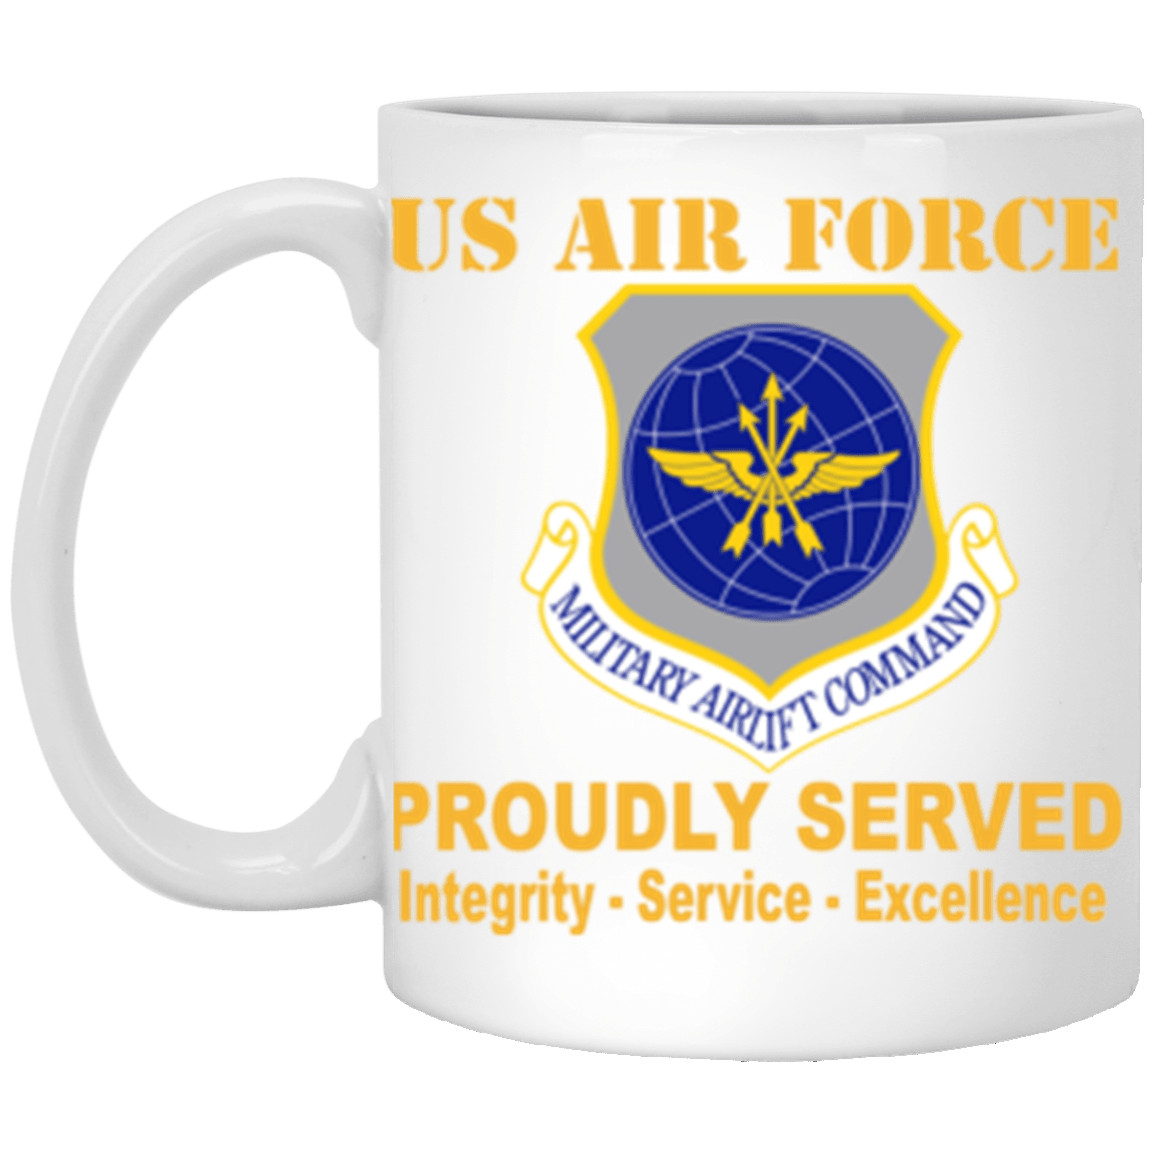 US Air Force Military Airlift Command Proudly Served Core Values 11 oz. White Mug-Drinkware-Veterans Nation